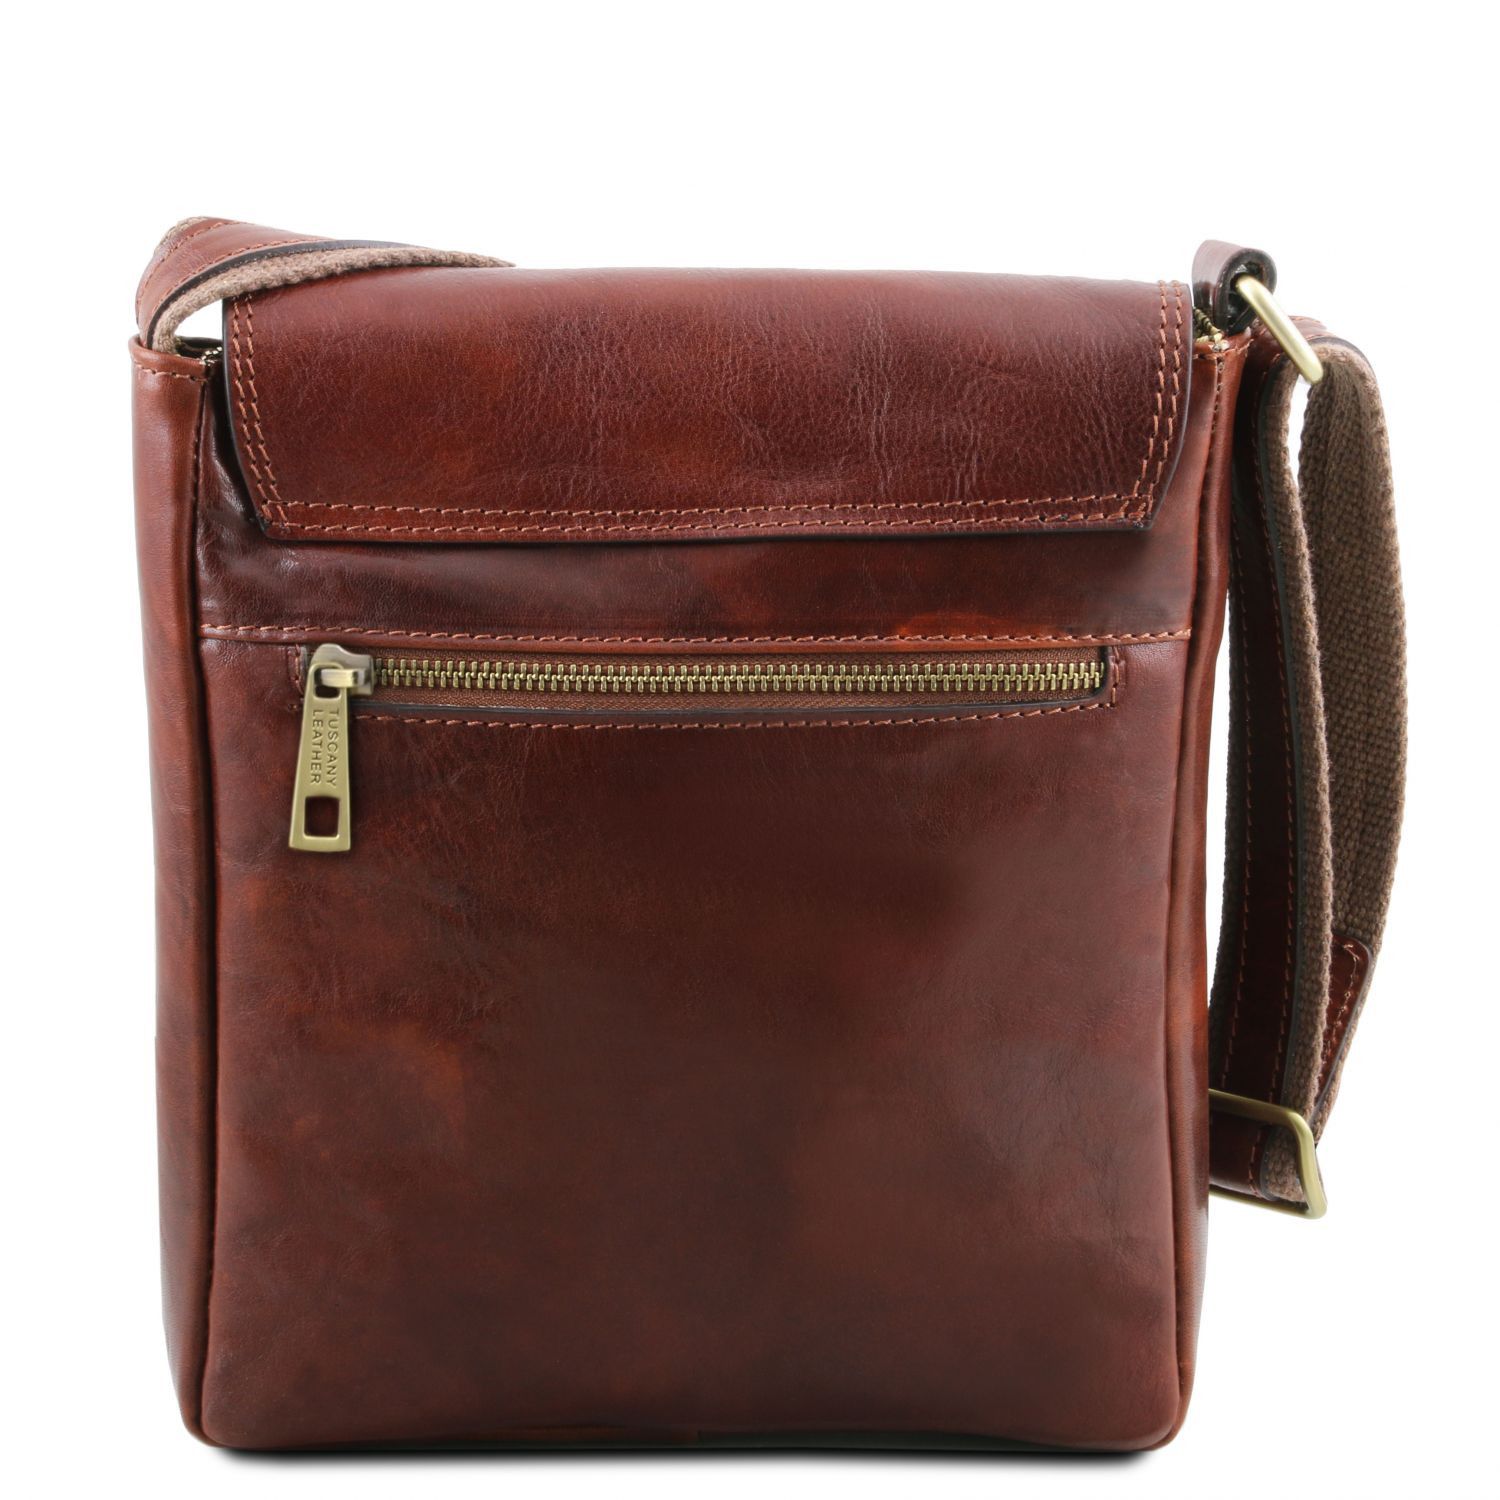 Jimmy - Leather Crossbody bag for men With Front Pocket Dark Brown TL141407